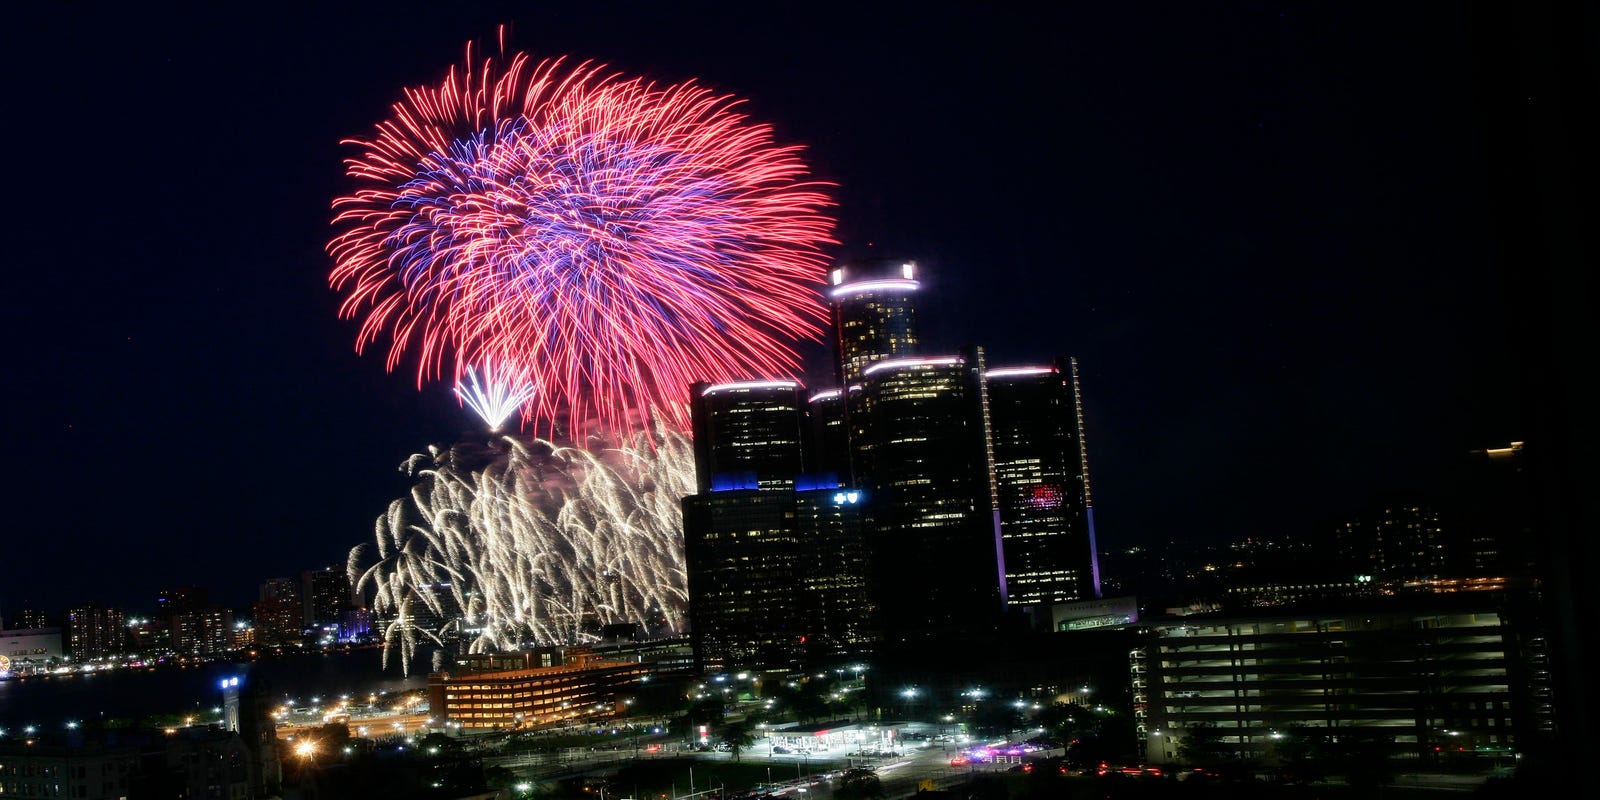 Detroit fireworks to be televised Aug. 31, public viewing not allowed